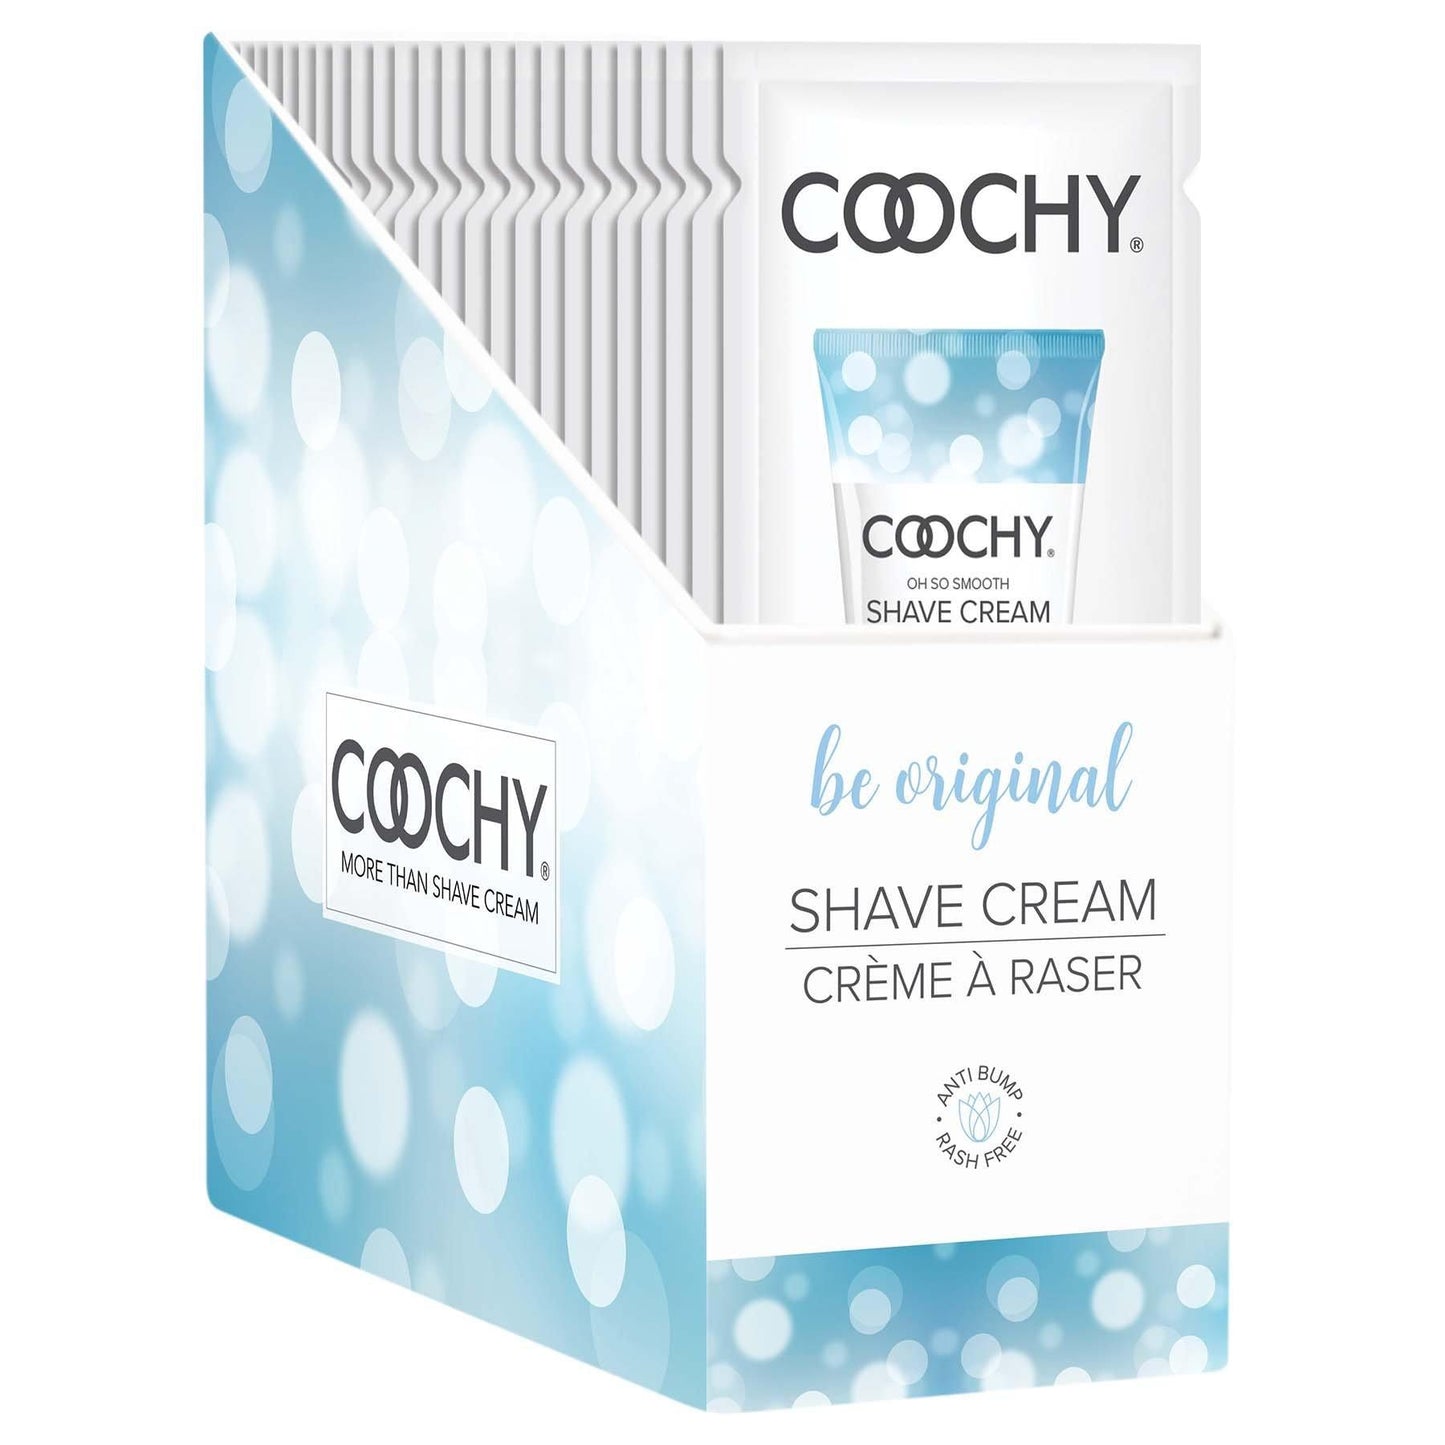 Coochy Shave Cream - Be Original - 15 ml Foils 24 Count Display - My Sex Toy Hub